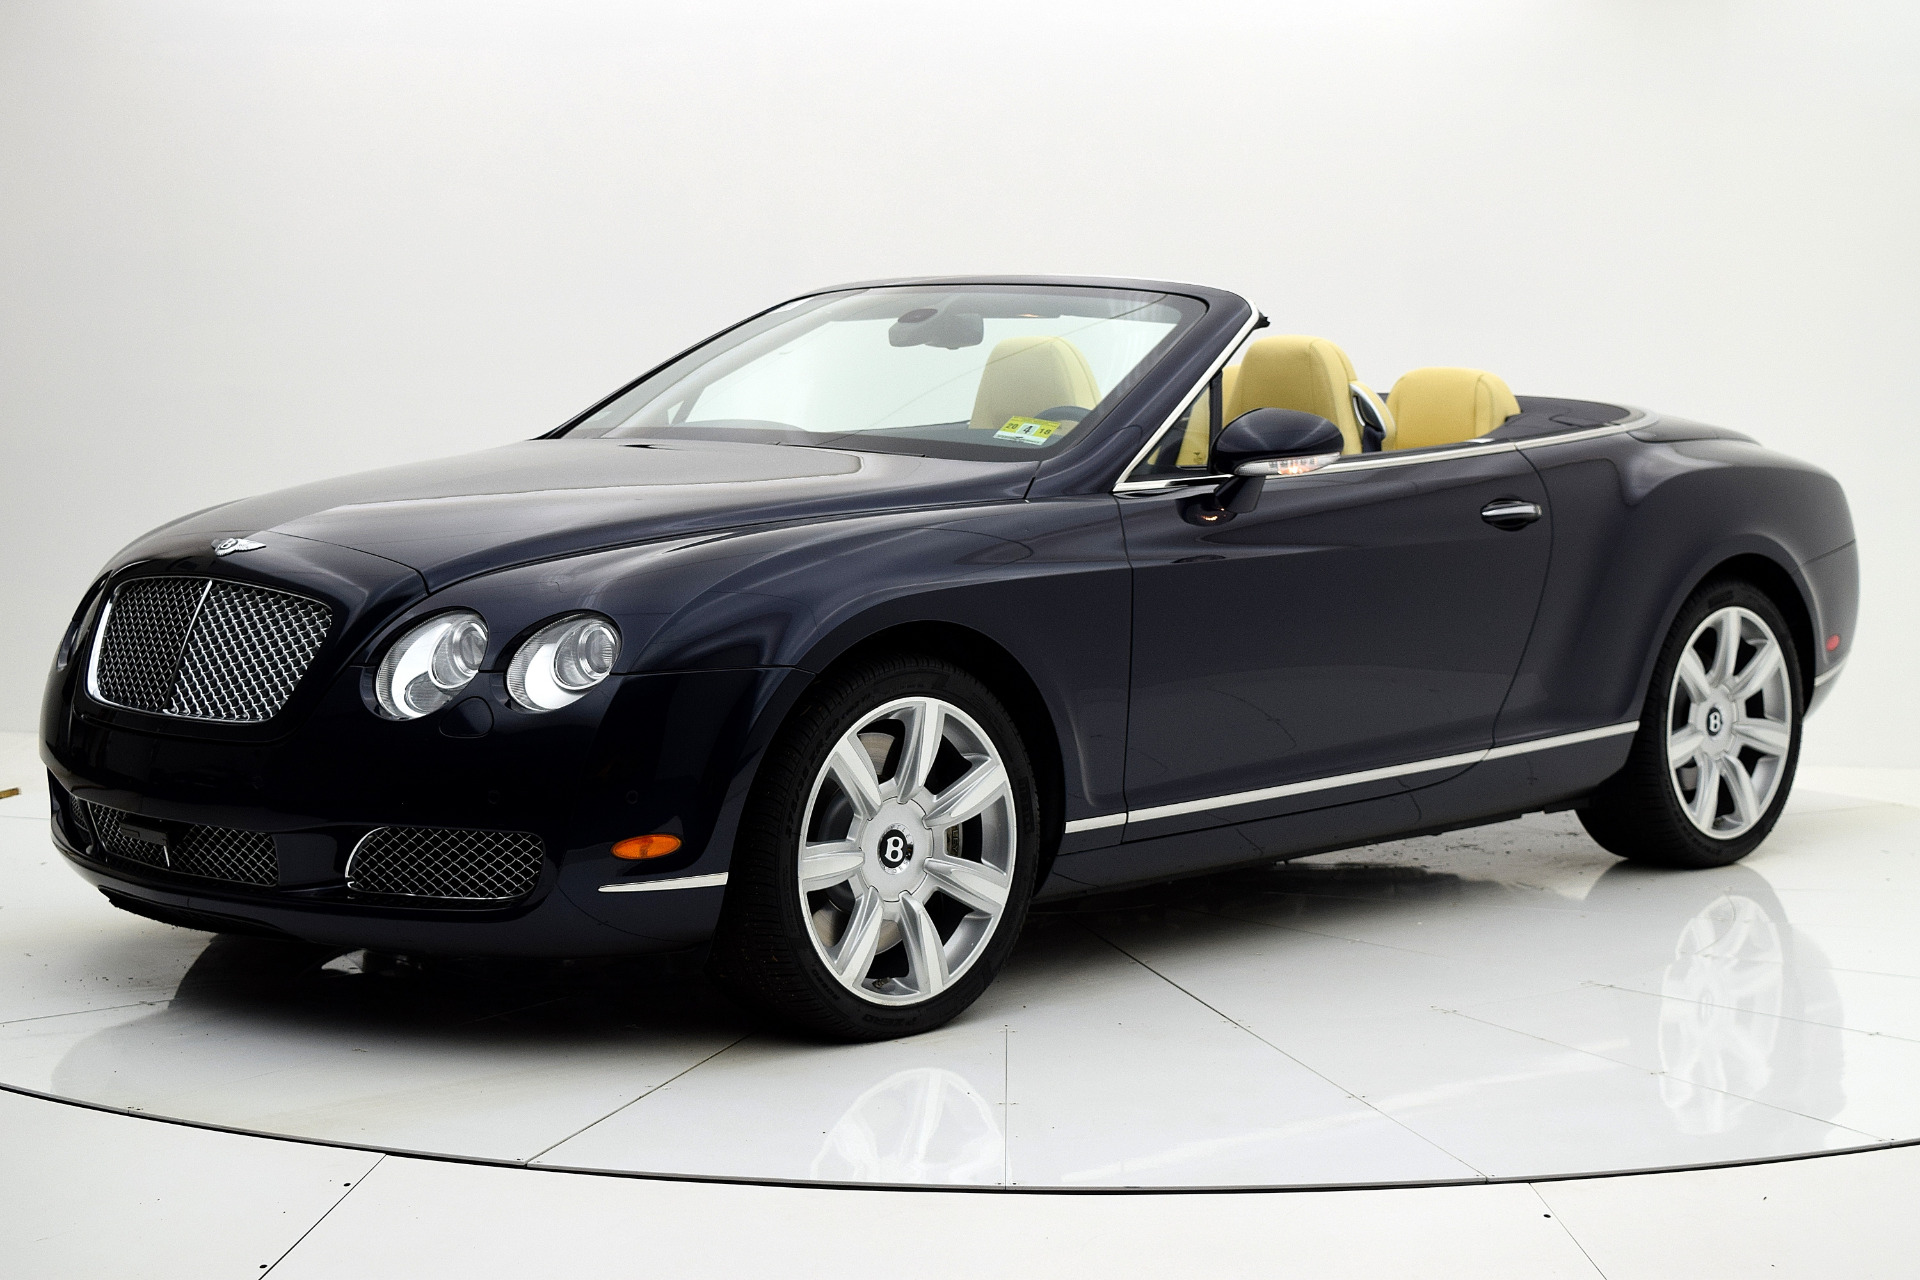 Used 2007 Bentley Continental GT for sale Sold at Bentley Palmyra N.J. in Palmyra NJ 08065 2